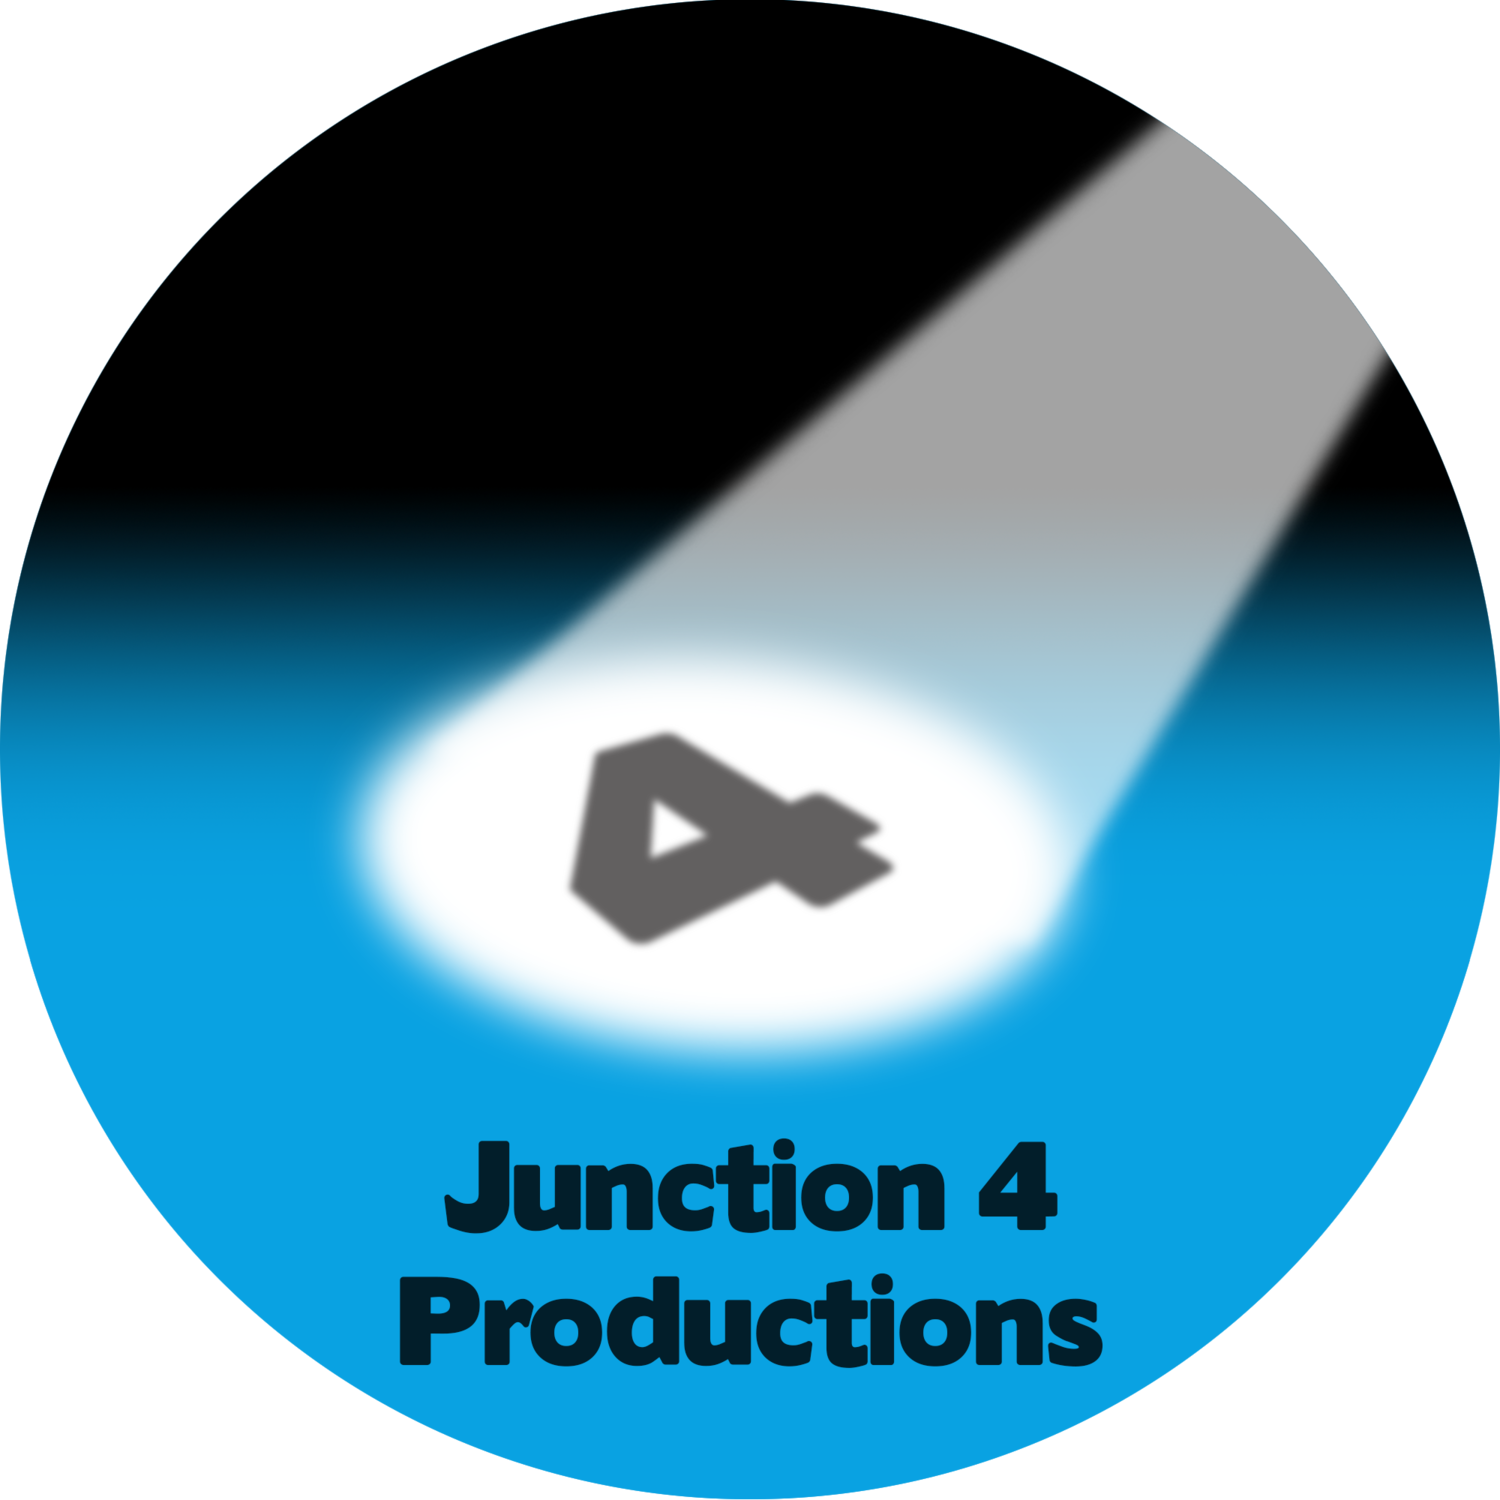 Junction 4 Productions